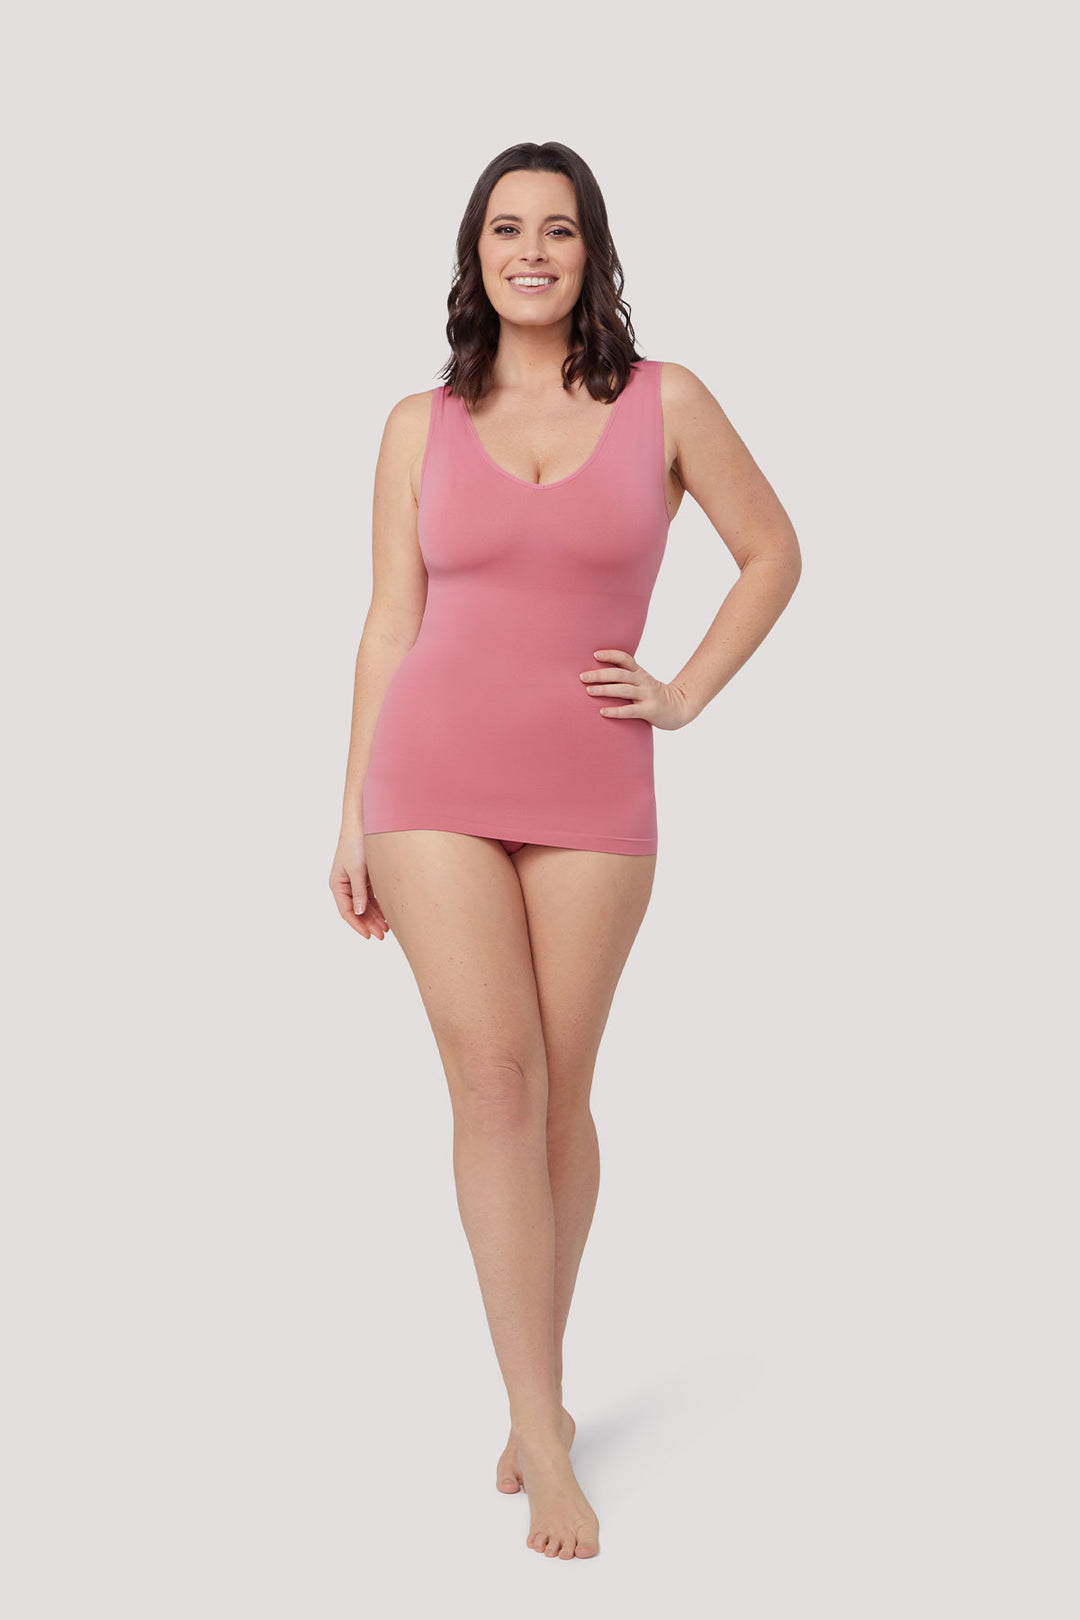 Women's comfortable Reversible Neckline, shaping and firming cami | Camyz Shapewear Smoothing Tank I Bella Bodies Australia I Rose Pink